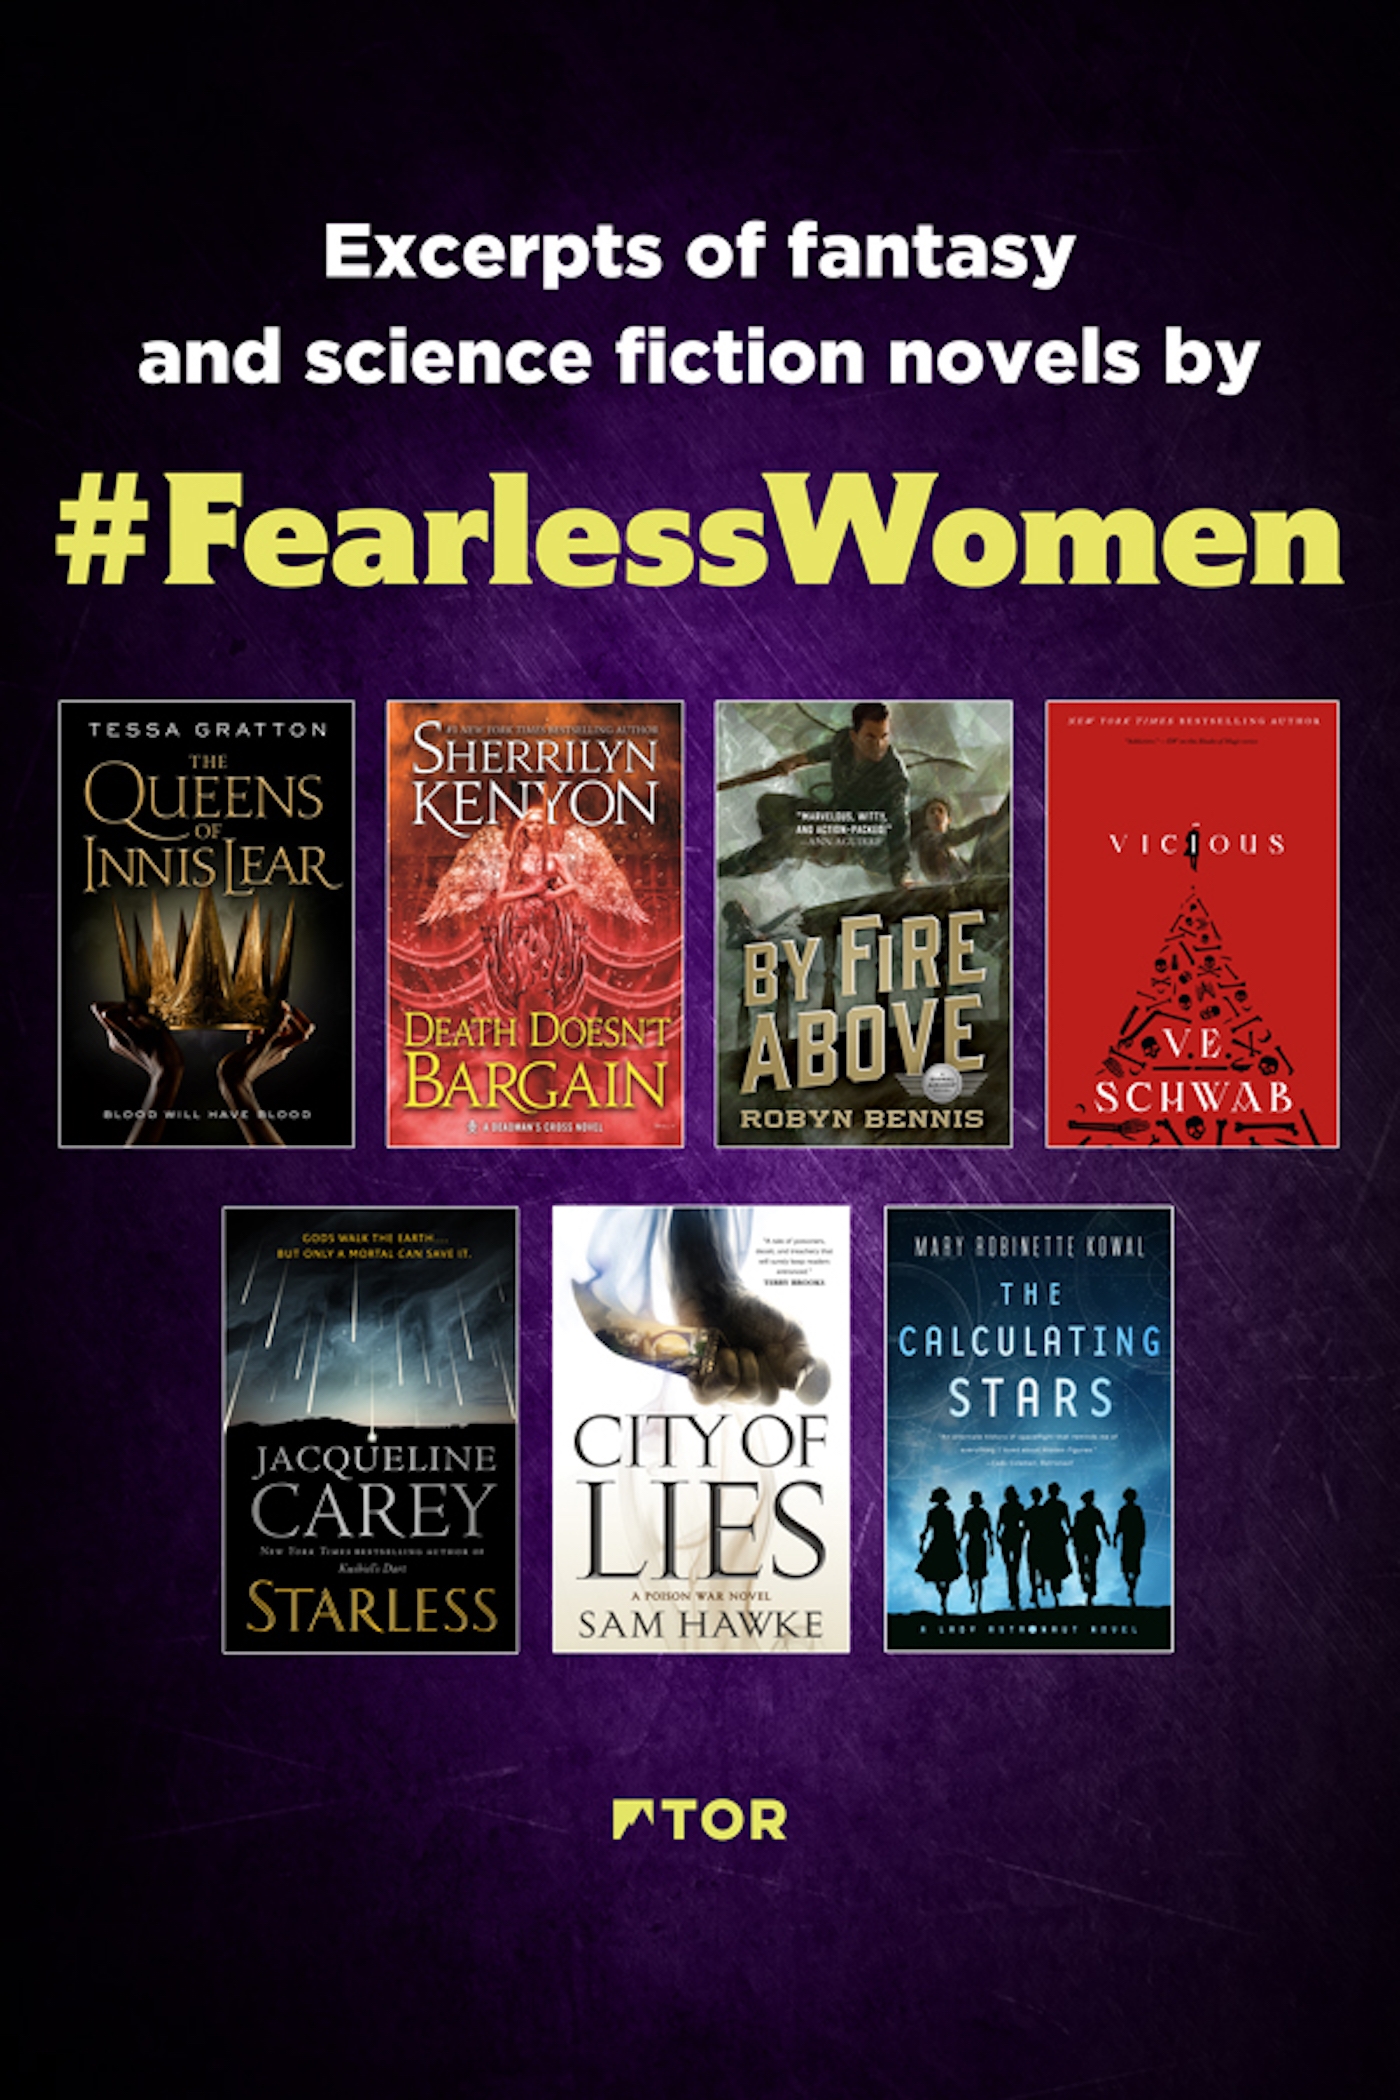 Fearless Women Sampler : Excerpts of Fantasy and Science Fiction Novels by Fearless Women by Tessa Gratton, Sherrilyn Kenyon, Robyn Bennis, V. E. Schwab, Jacqueline Carey, Sam Hawke, Mary Robinette Kowal